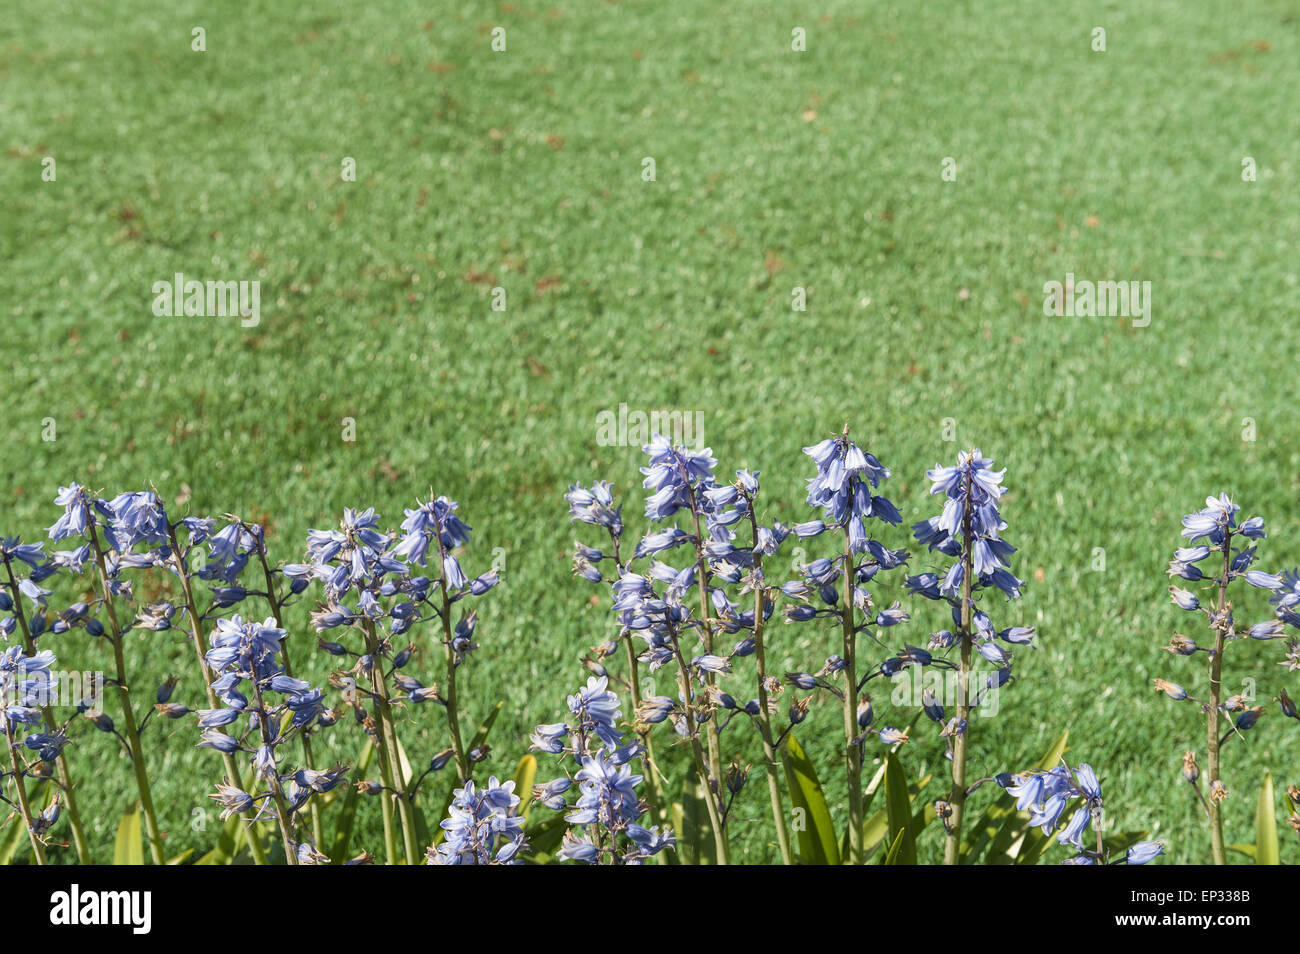 Low maintenance blending in a plastic grass lawn beside patio and flower border no mowing or cutting the lawn quite realistic Stock Photo